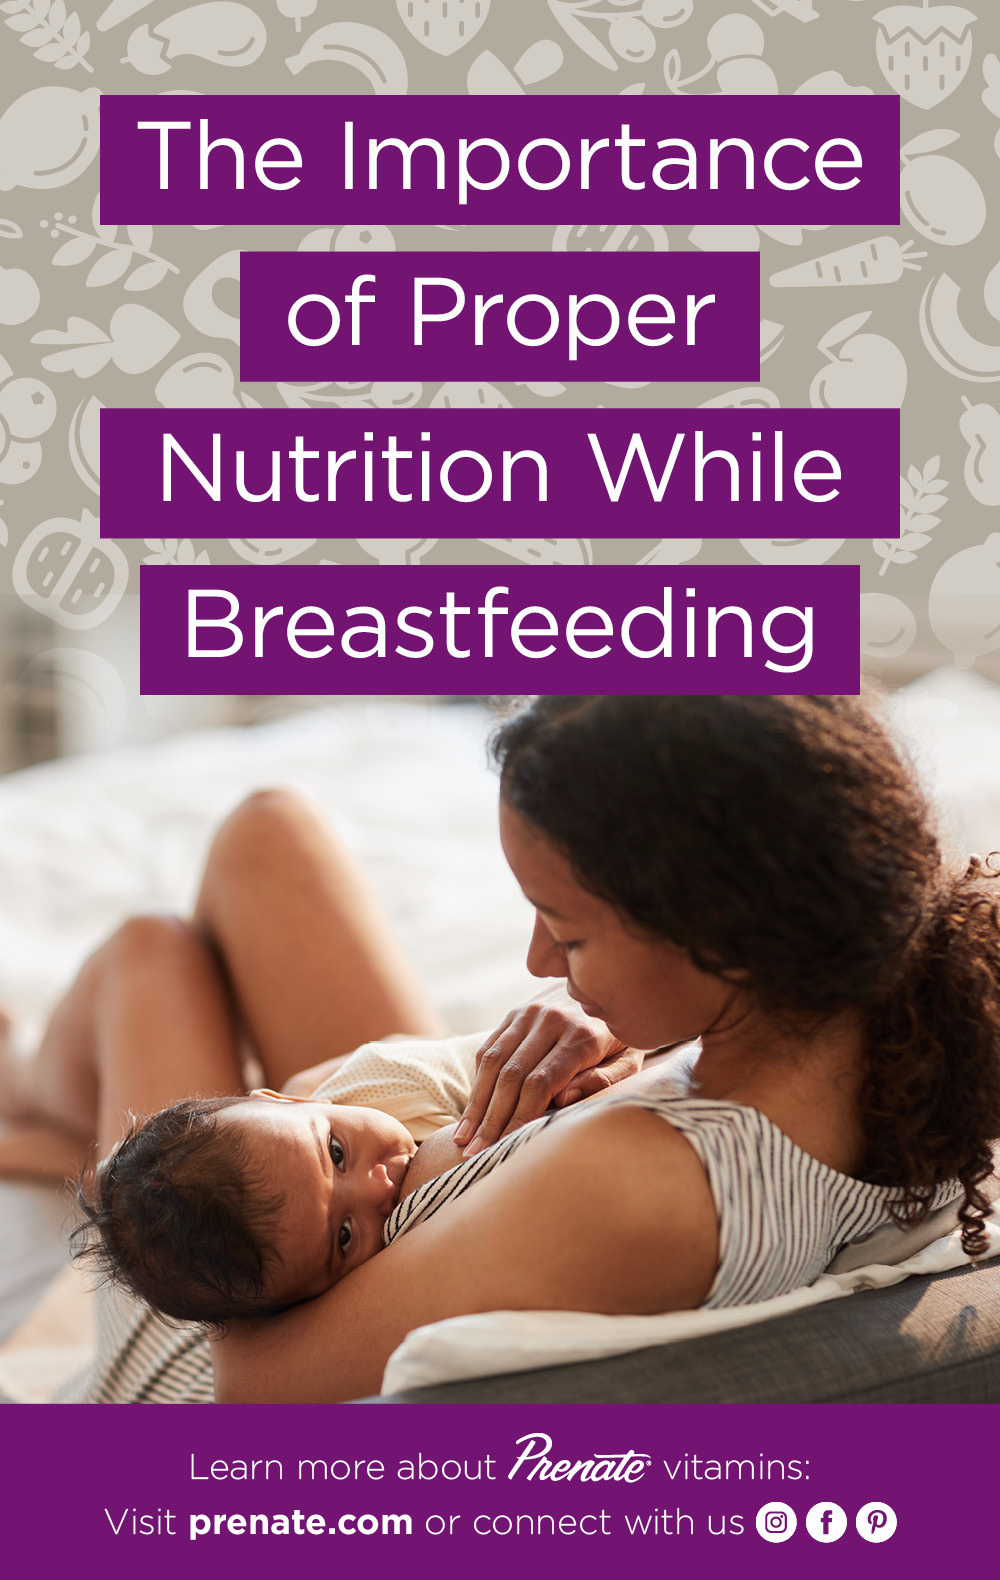 Importance of Proper Nutrition While Breastfeeding graphic